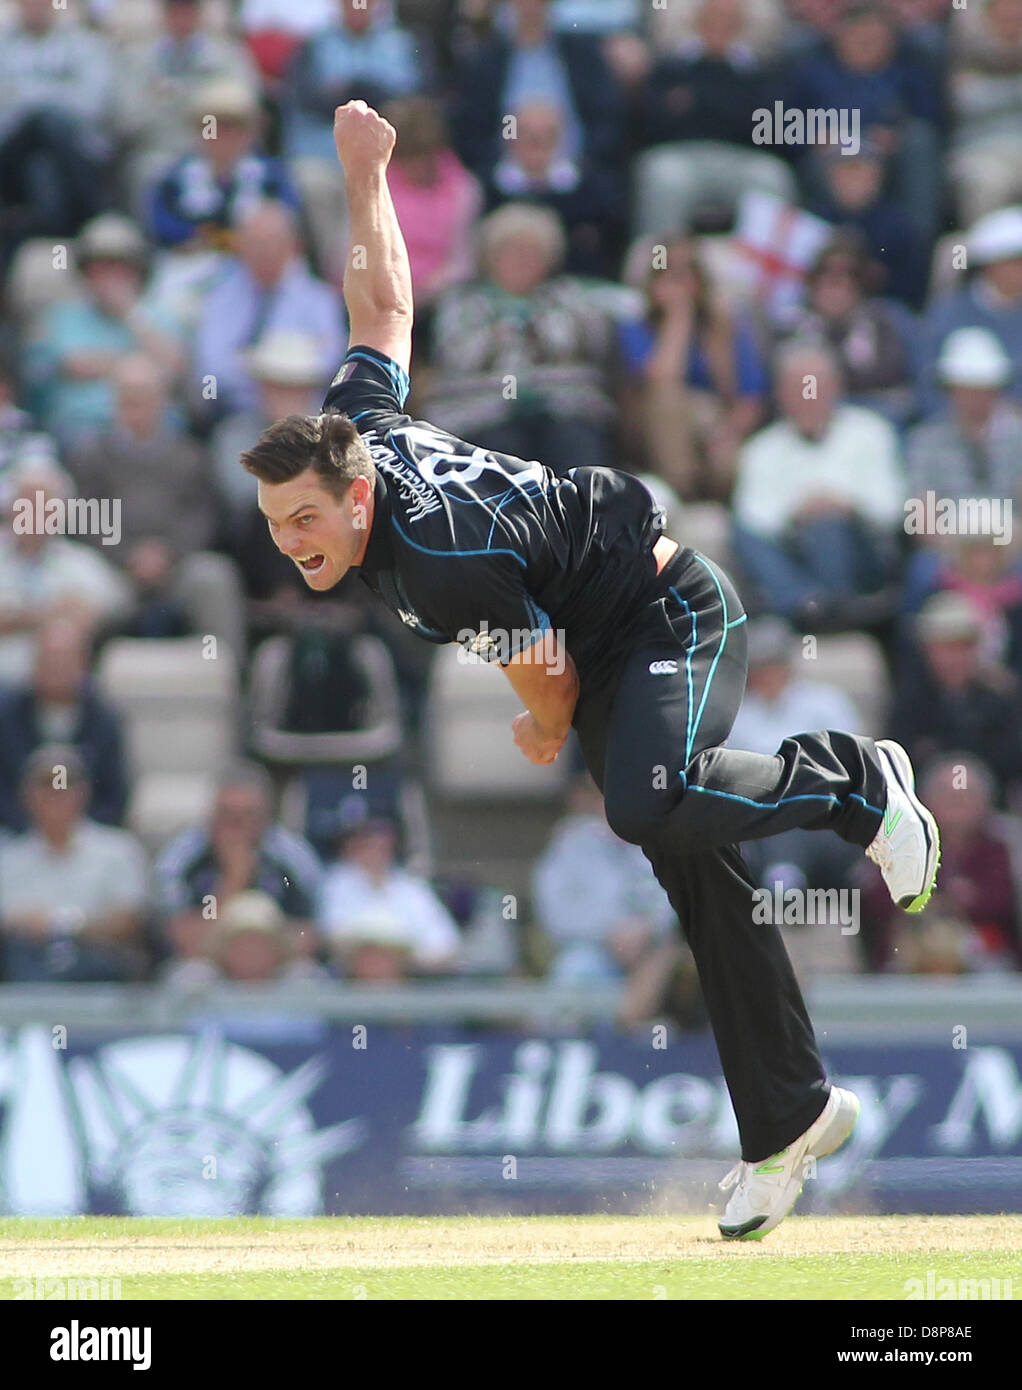 SOUTHAMPTON, ENGLAND - June 02: New Zealand's Mitchell McClenaghan bowling during the 2nd Nat West one day international cricket match between England and New Zealand at Lords Cricket Ground on June 02, 2013 in London, England, (Photo by Mitchell Gunn/ESPA) Stock Photo